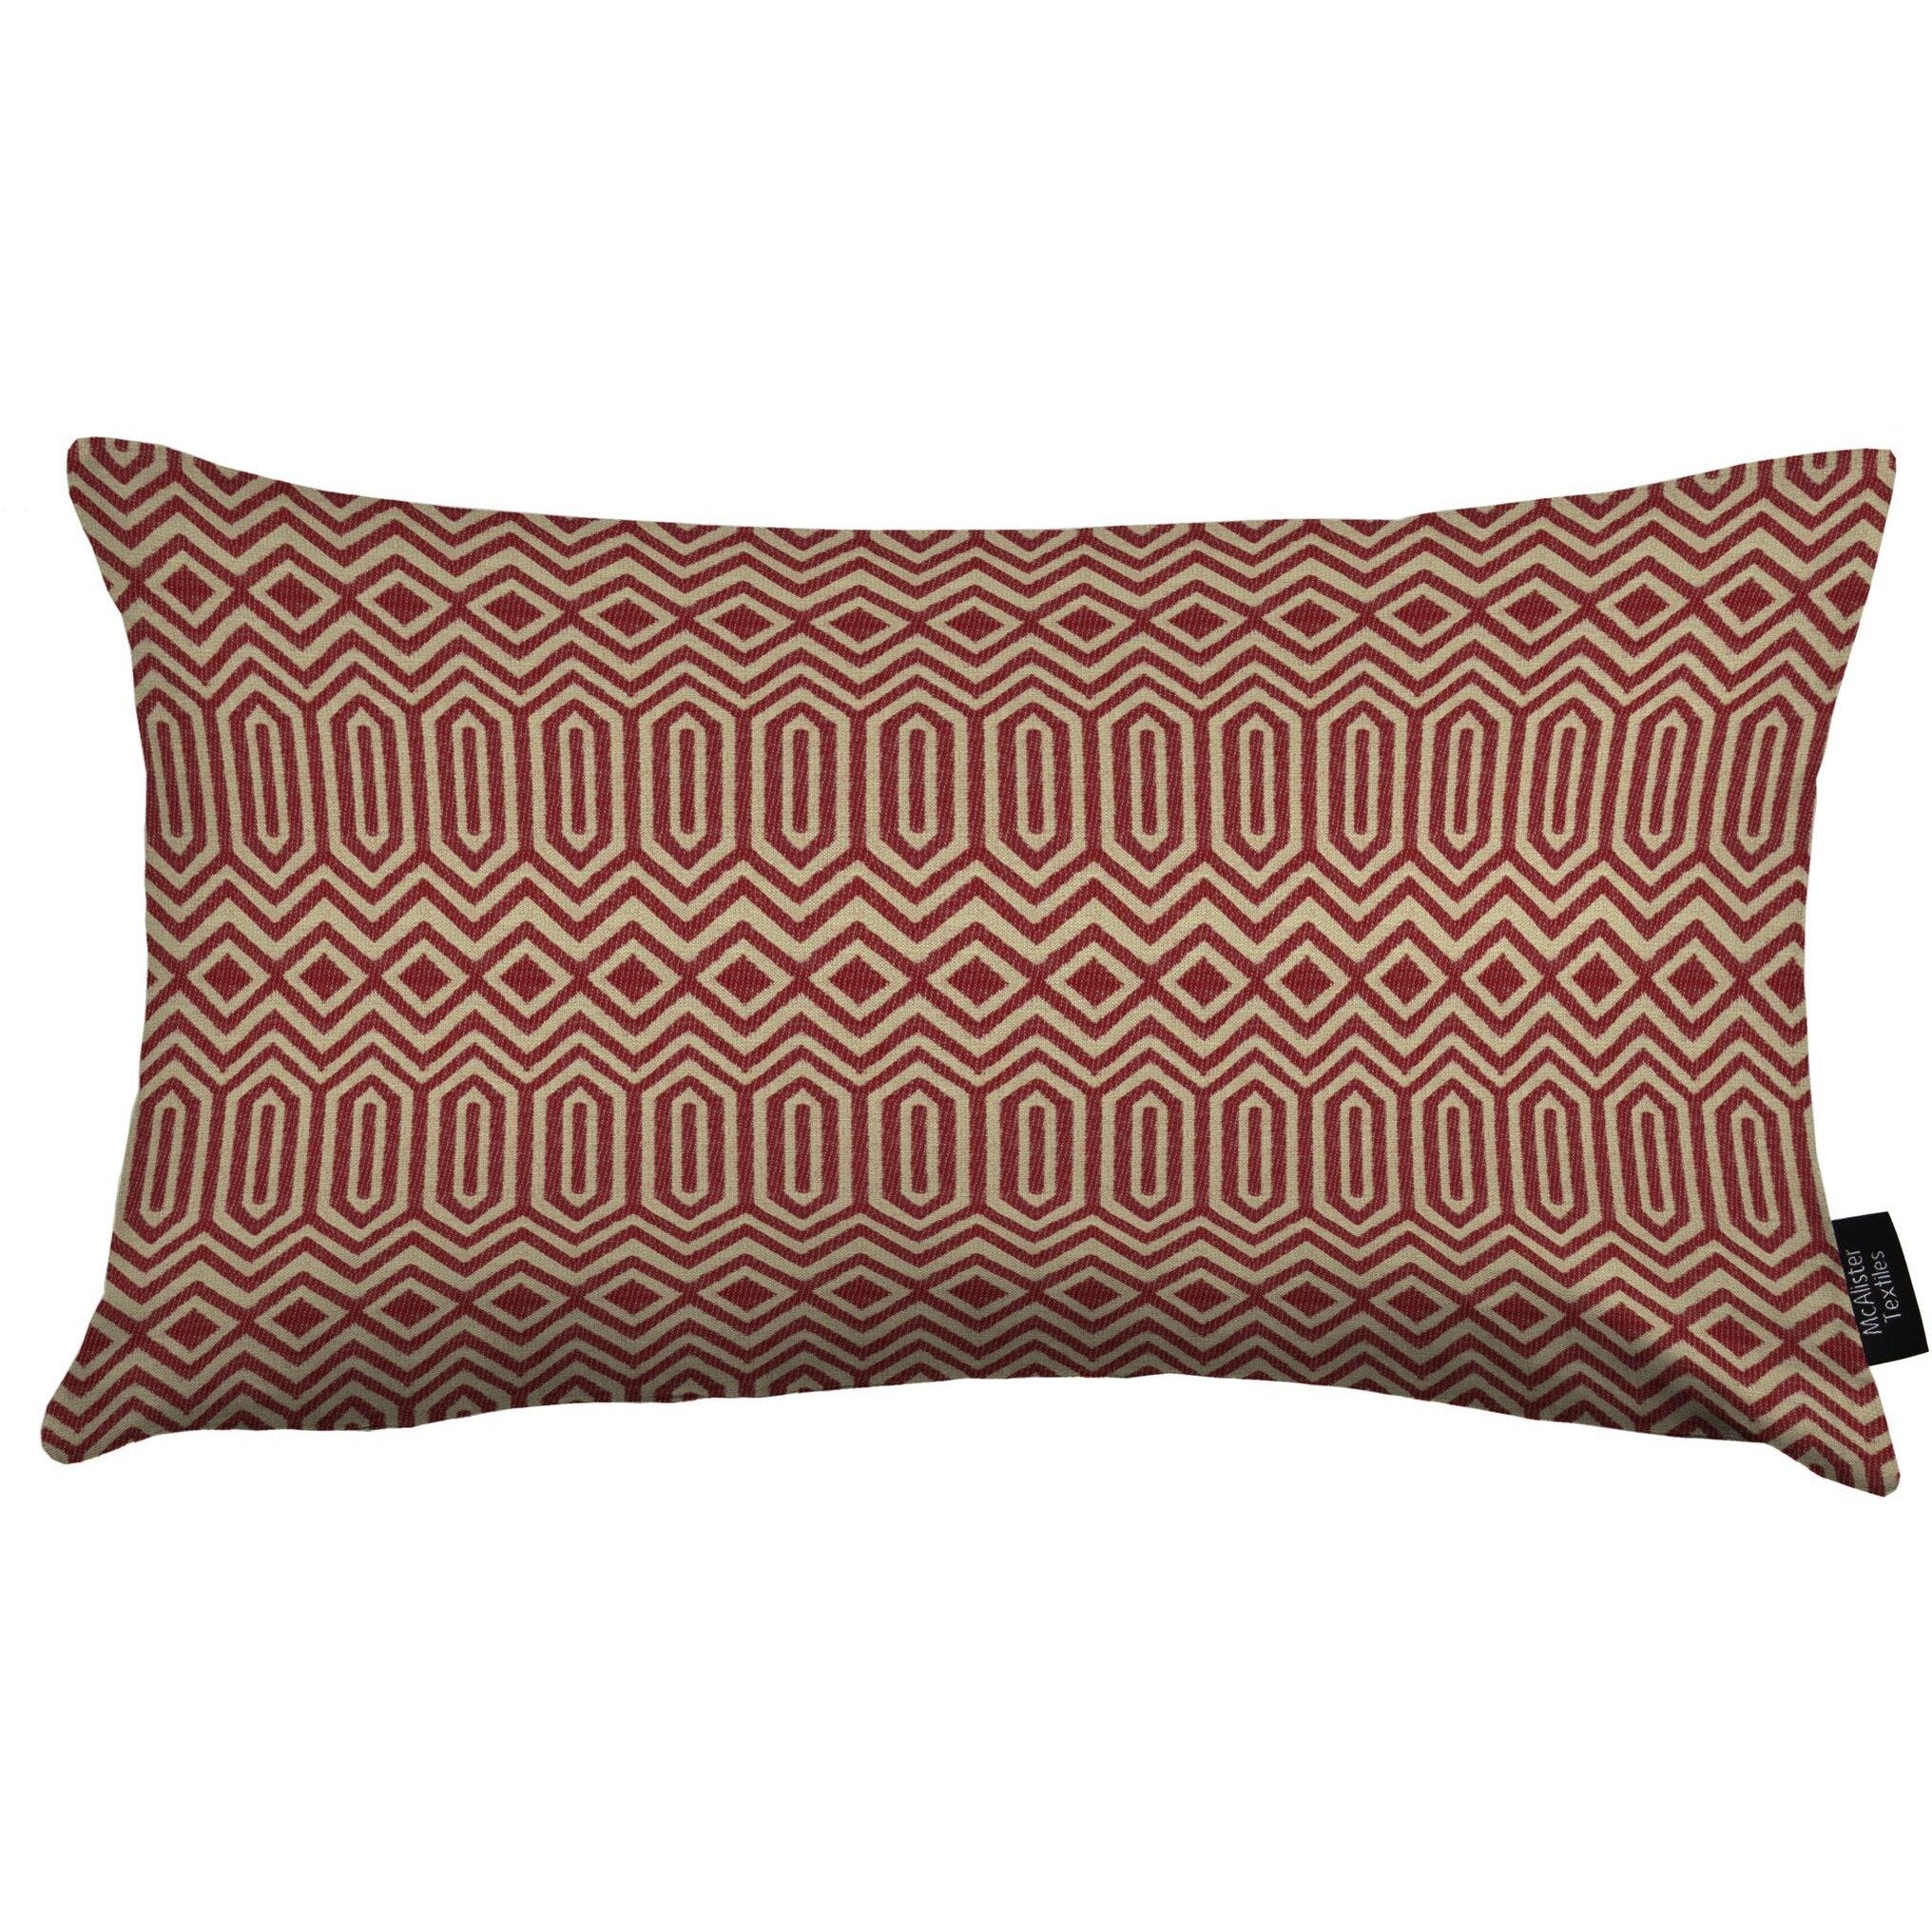 McAlister Textiles Colorado Geometric Red Cushion Cushions and Covers Cover Only 50cm x 30cm 